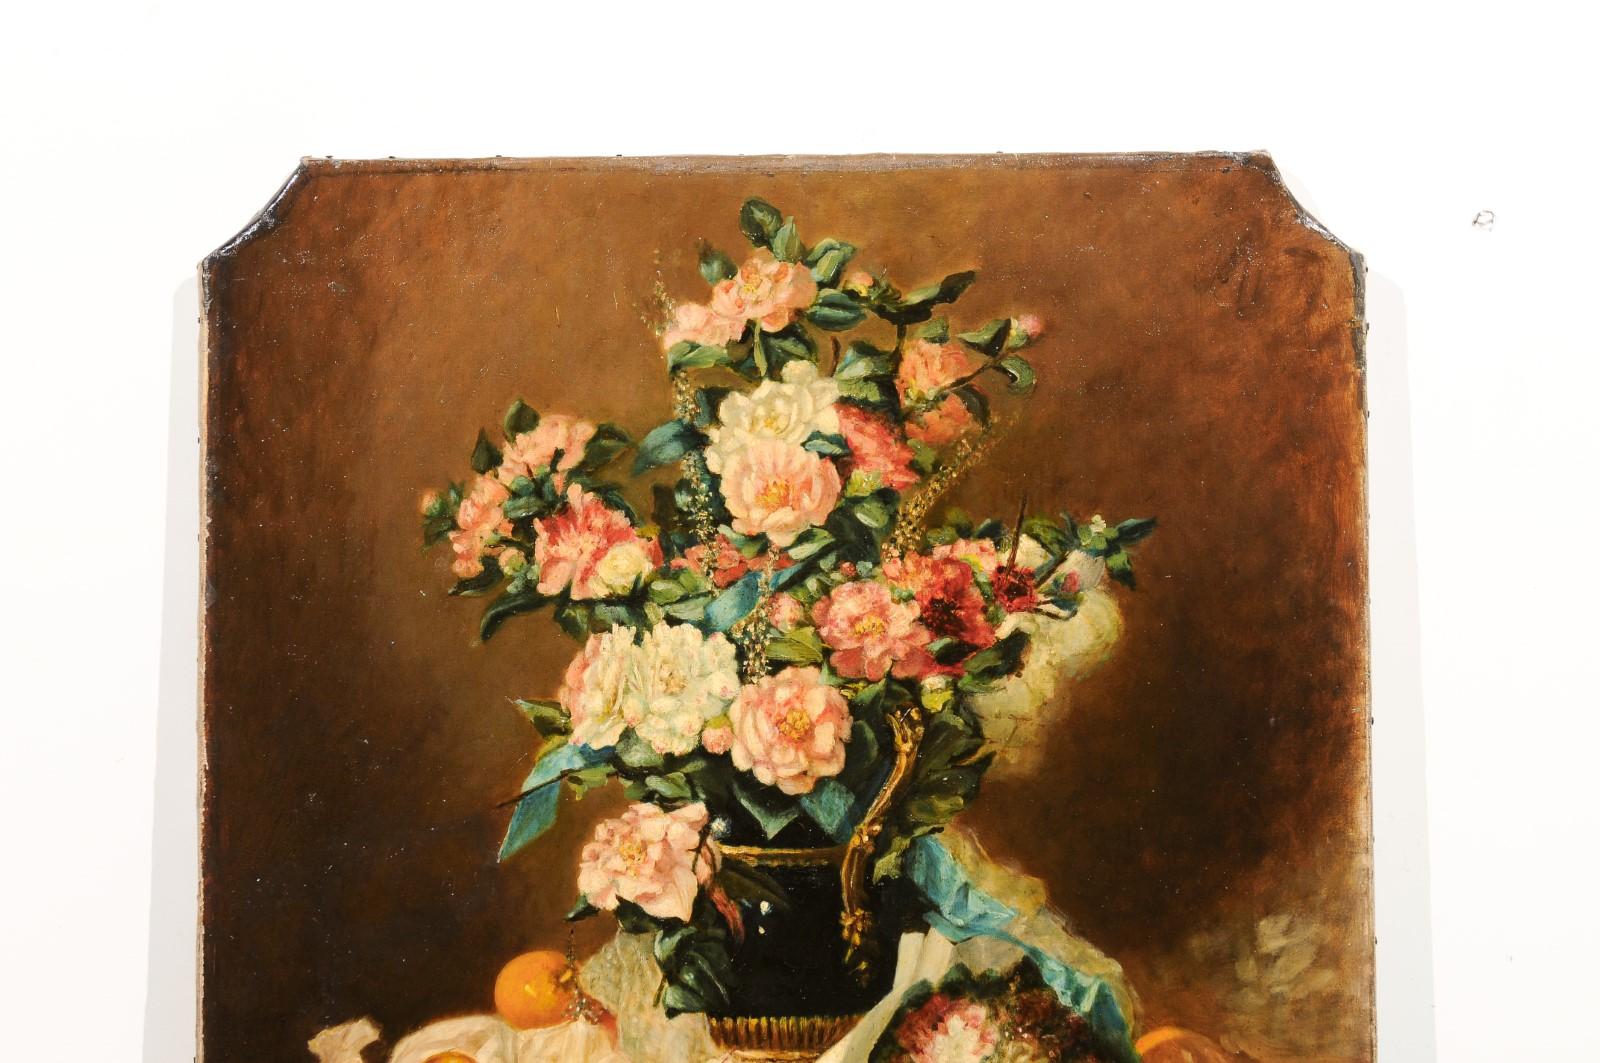 French 1790s Oil on Canvas Painting with Floral Bouquet, Fruits and Embroidery In Good Condition For Sale In Atlanta, GA